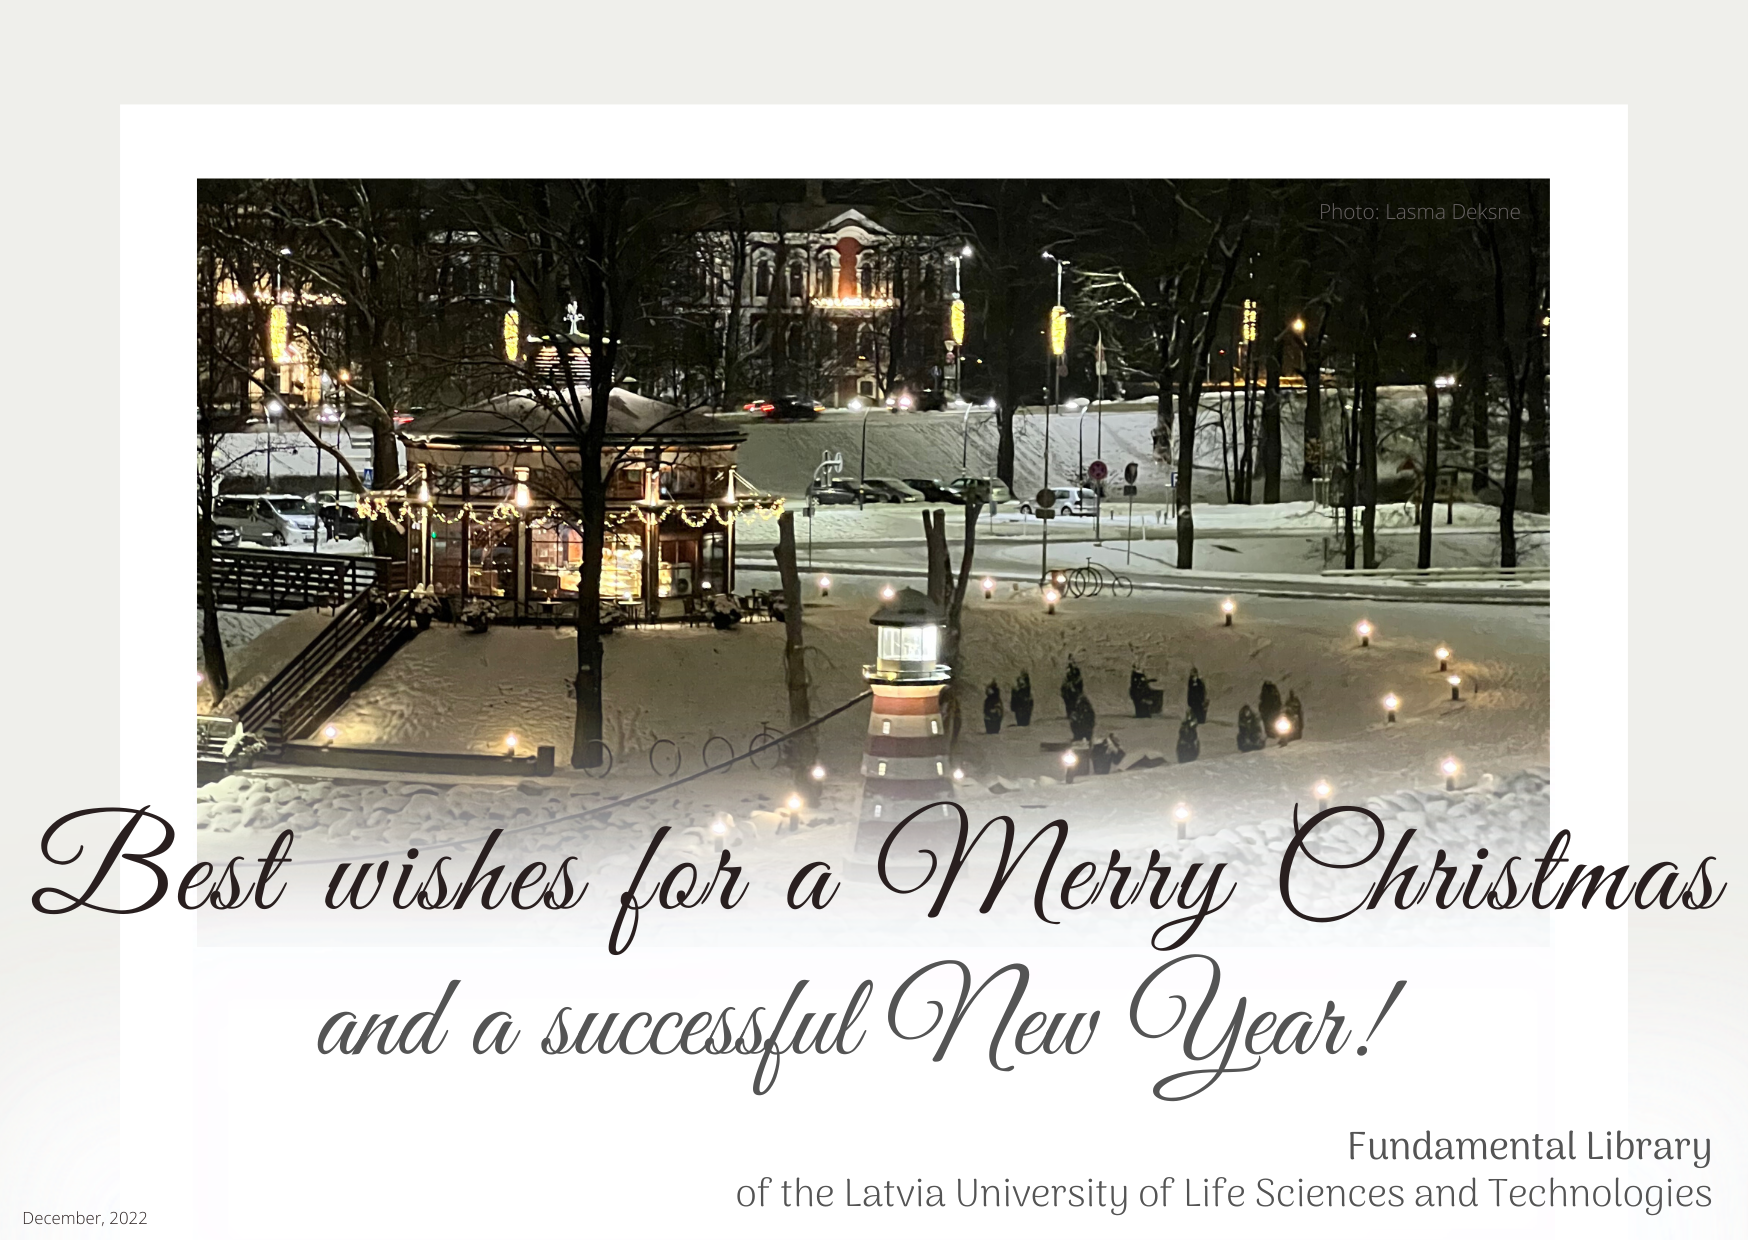 Best wishes for a Merry Christmas and a successful New Year!